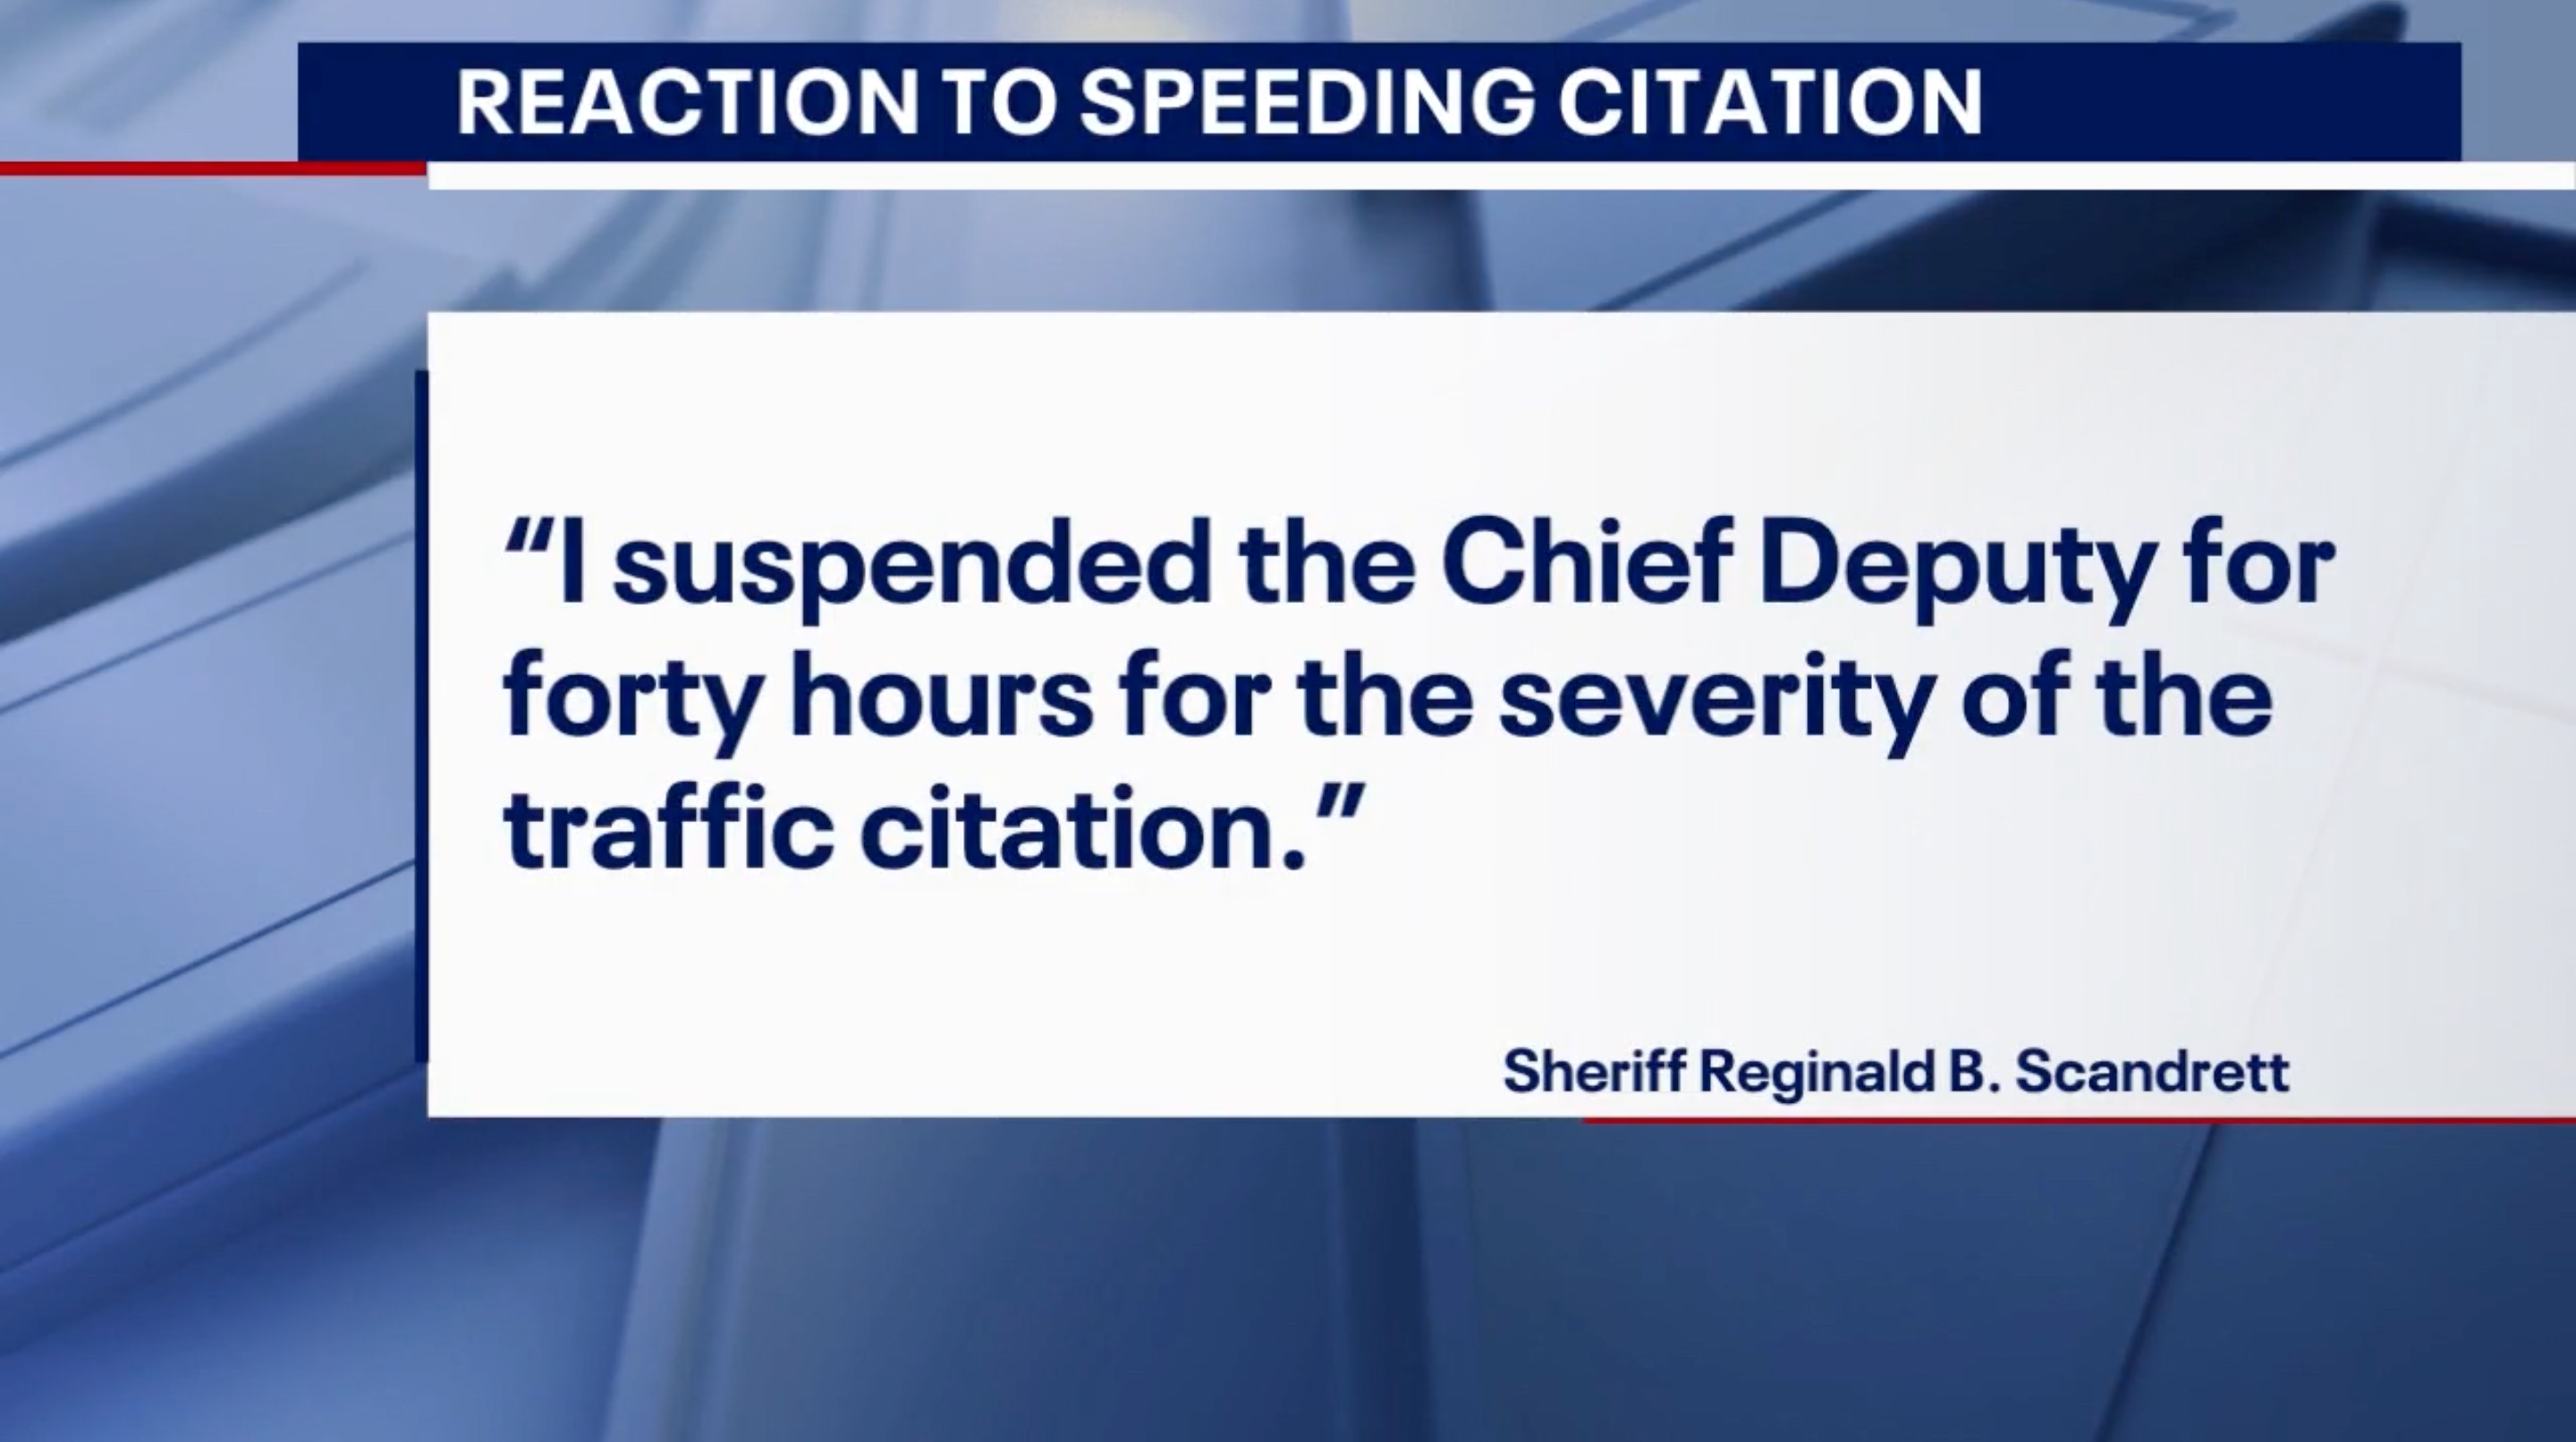 A quote from Sheriff Reginald B. Scandrett that states, "I suspended the Chief Deputy for forty hours for the severity of the traffic citation."